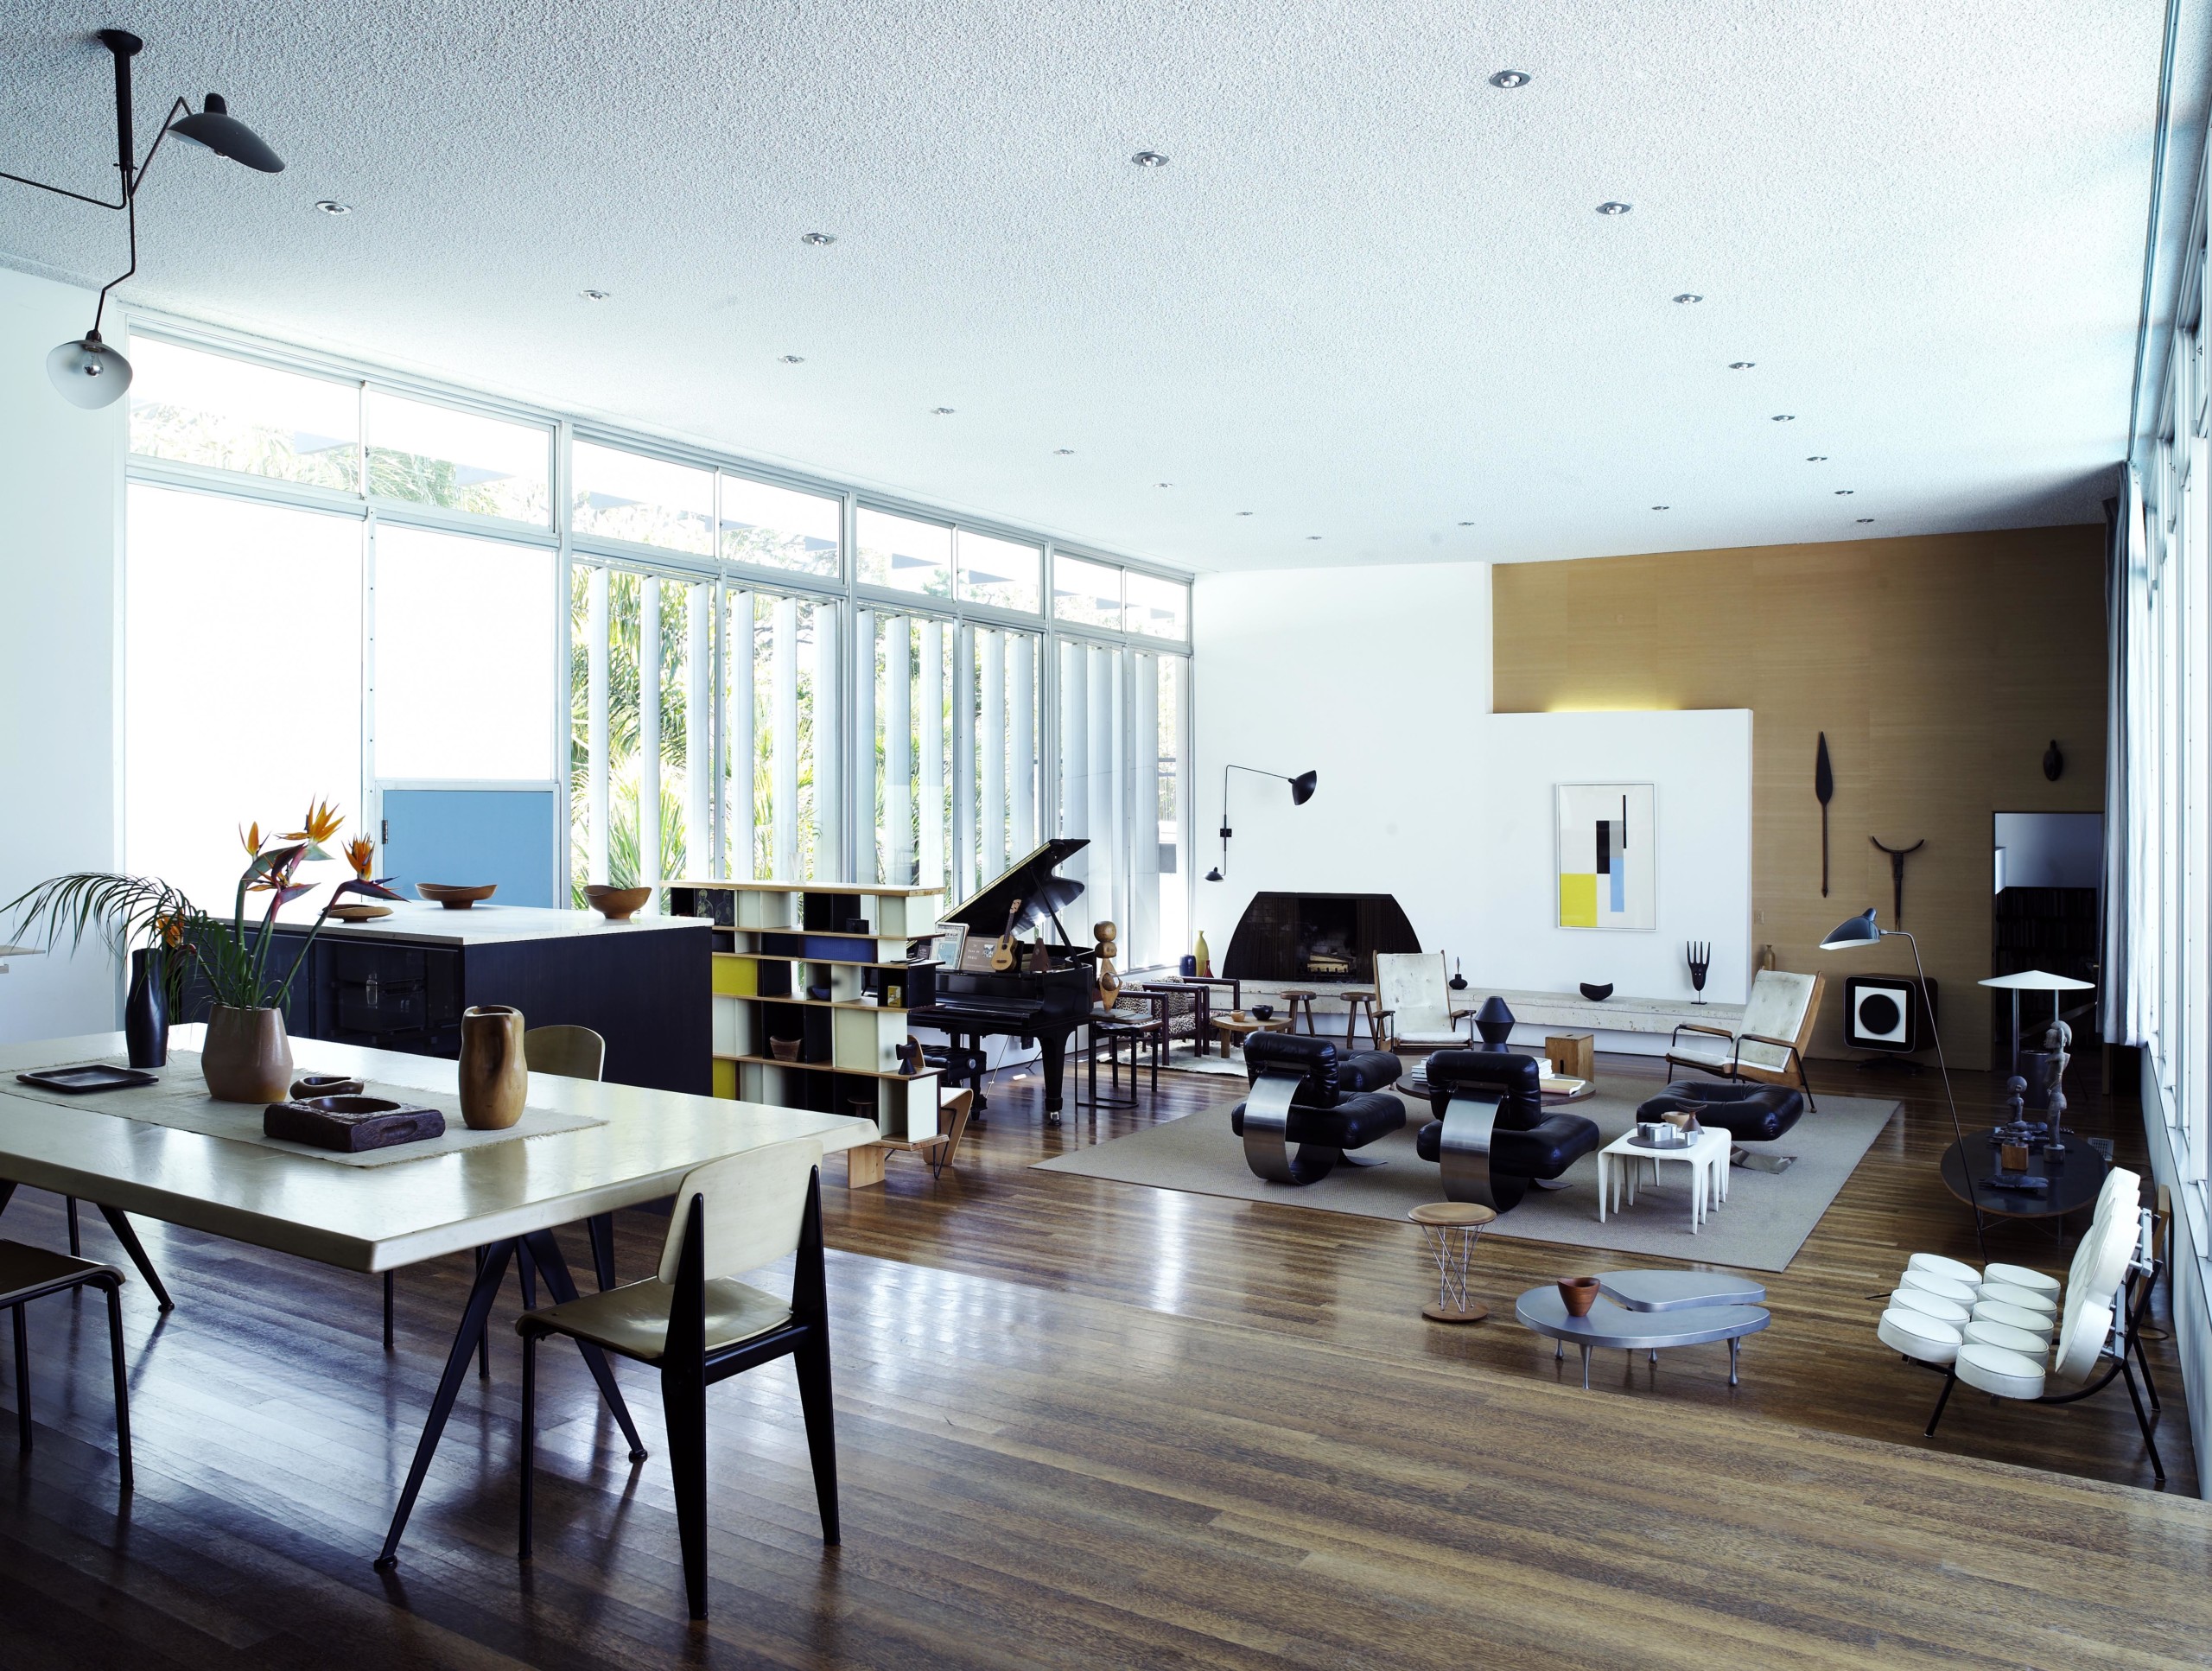 The open plan living and dining room of Michael Boyd's Santa Monica home, featuring pieces by Oscar Niemeyer, Charlotte Perriand, Marcel Breuer, Isamu Noguchi and Serge Mouille.